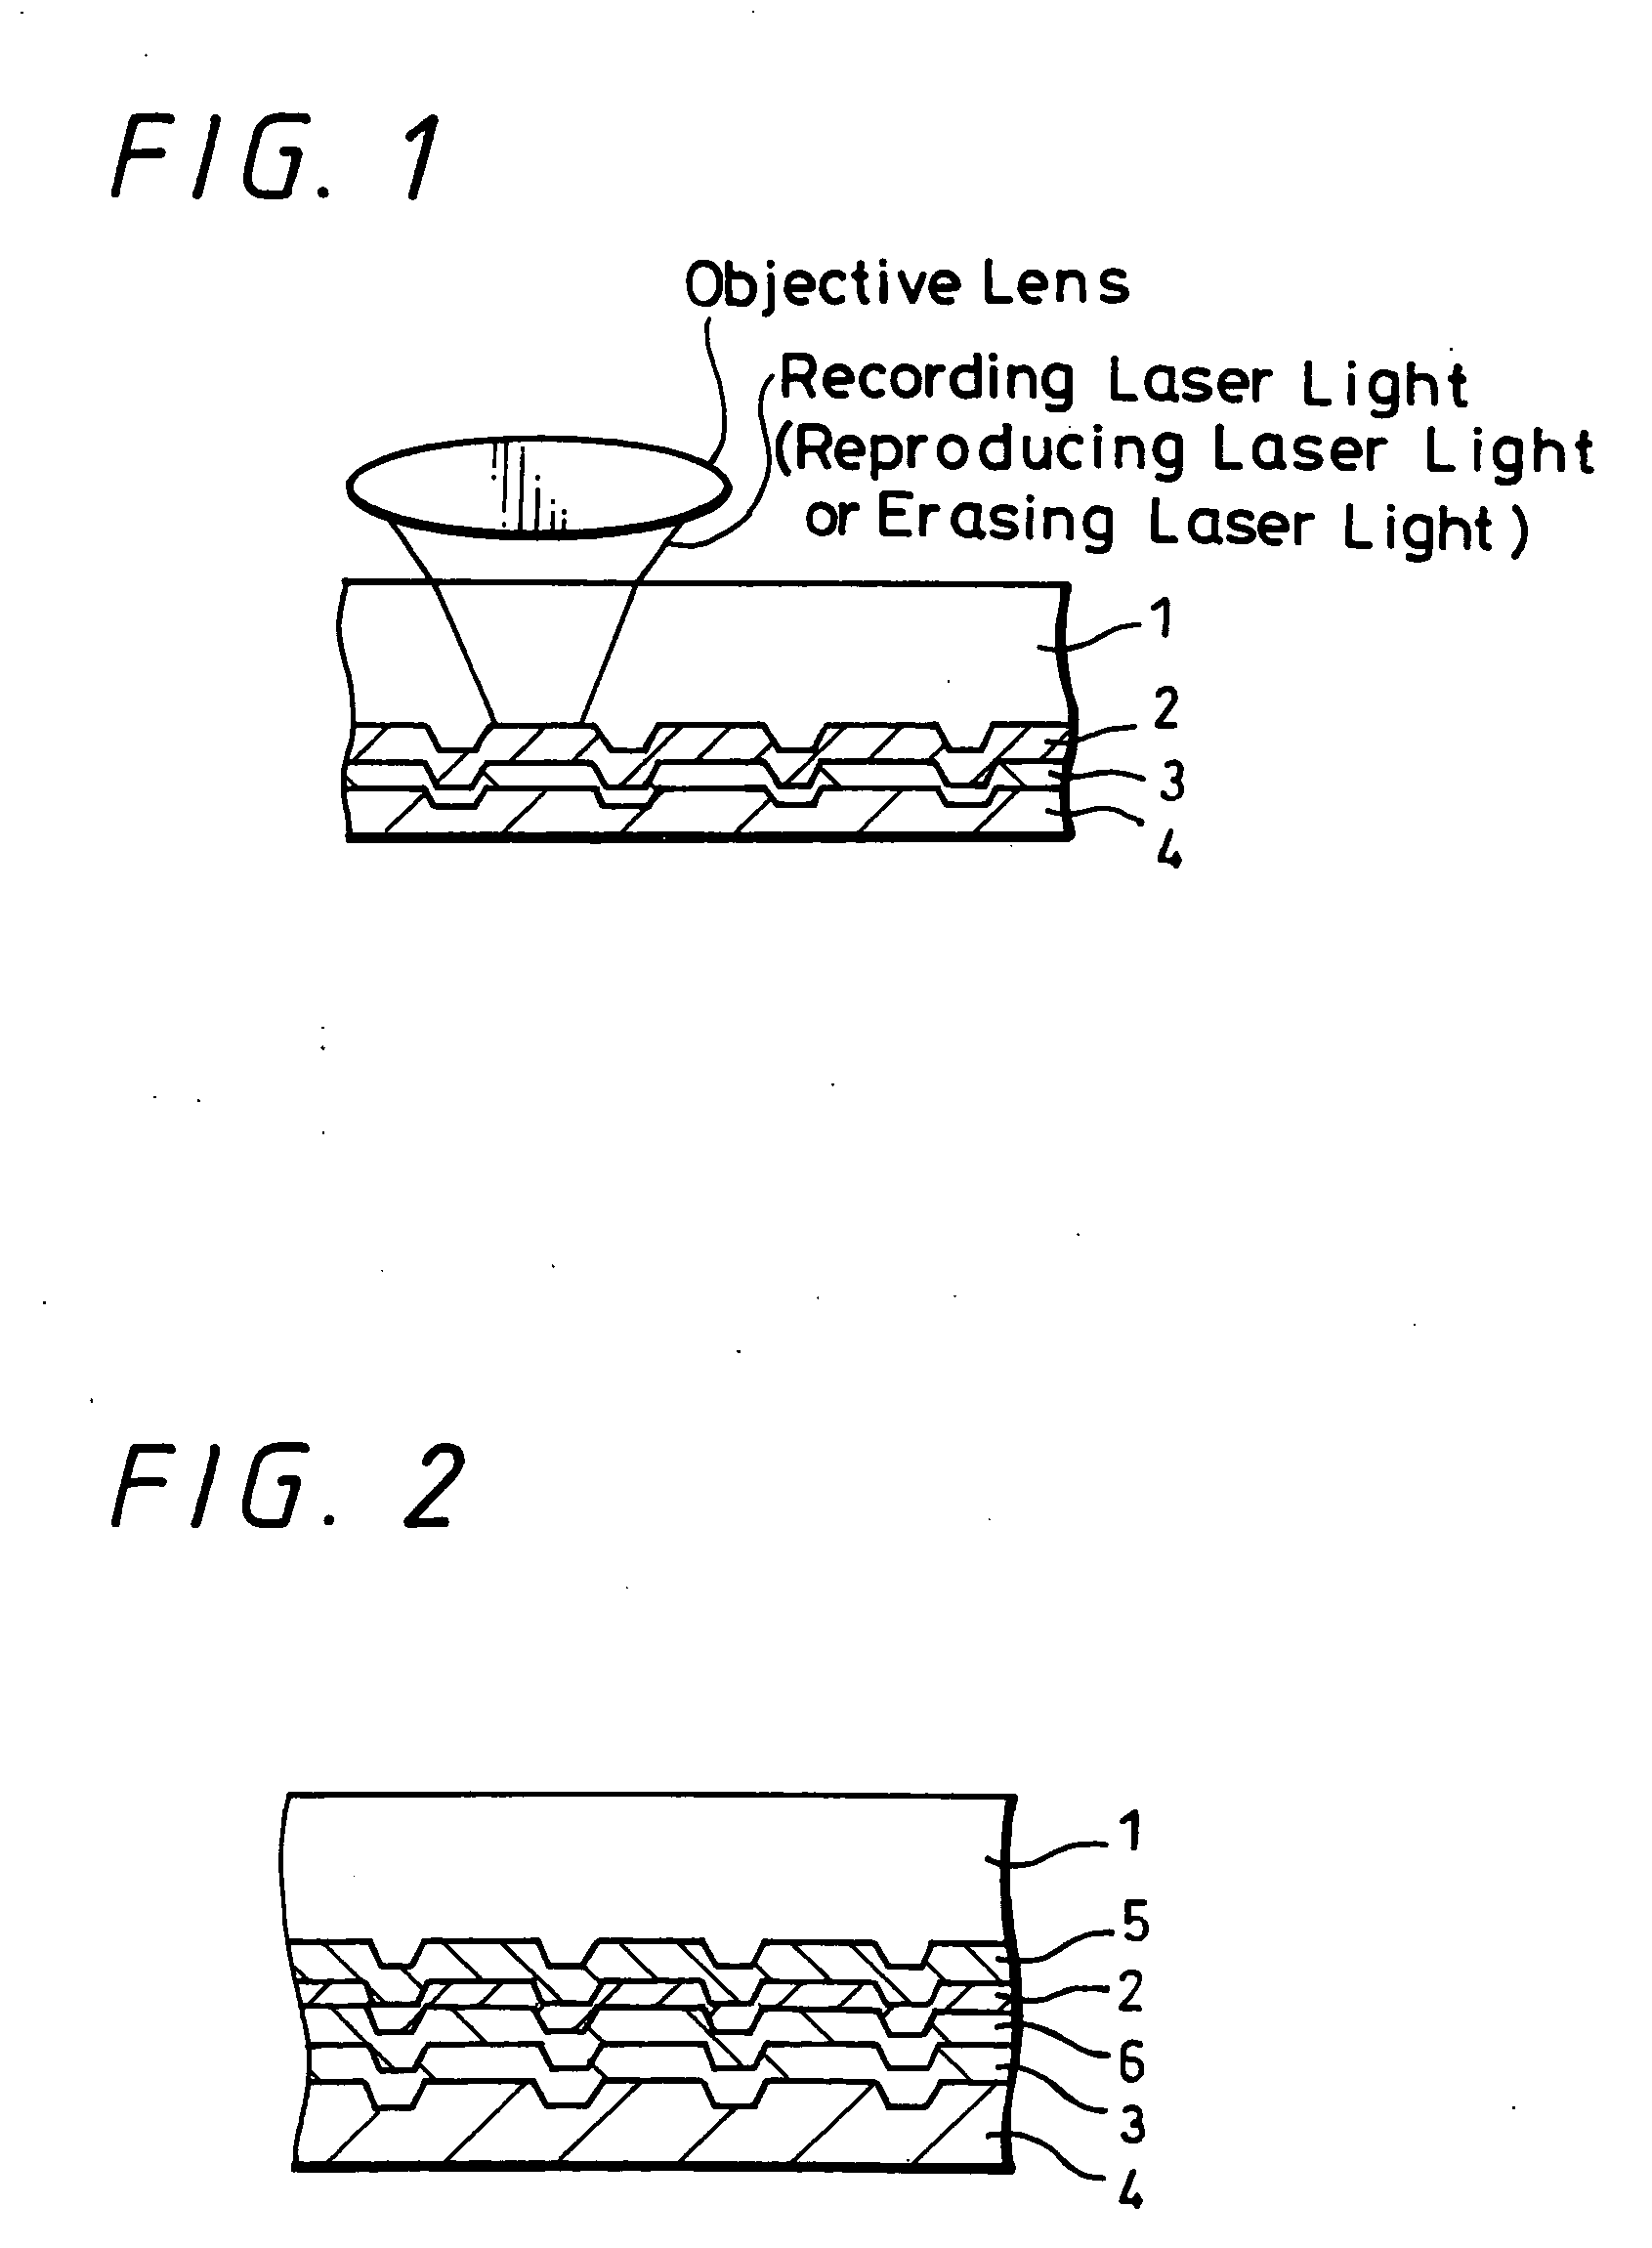 Rewritable optical information recording medium, recording and reproducing methods, as well as recording and reproducing apparatus